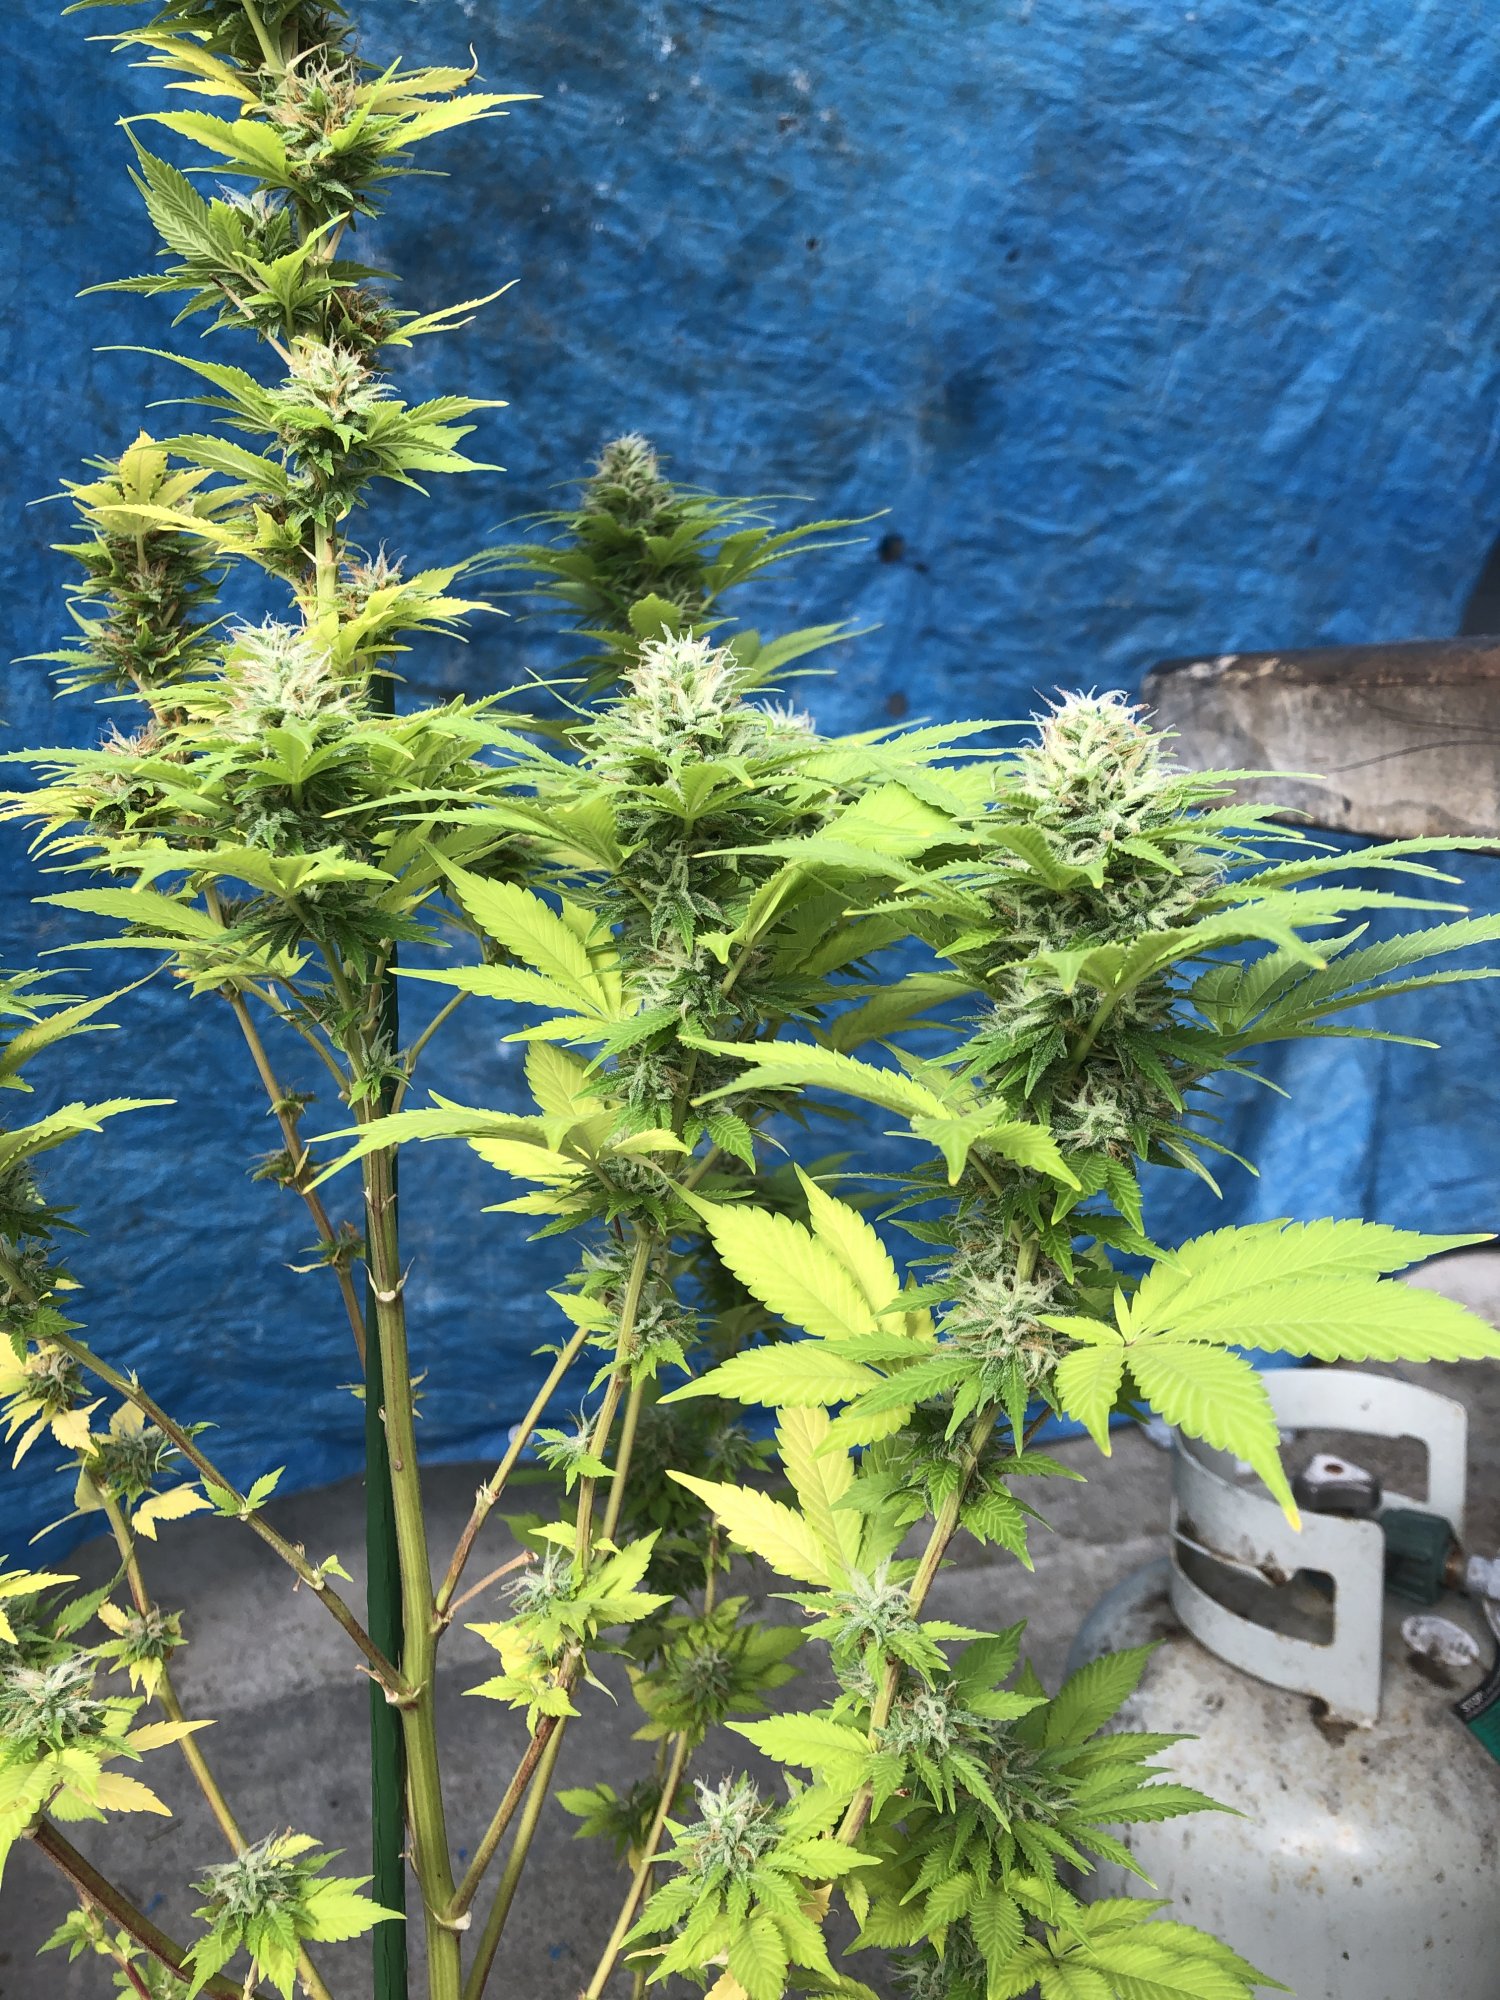 New grower need some guidance 3